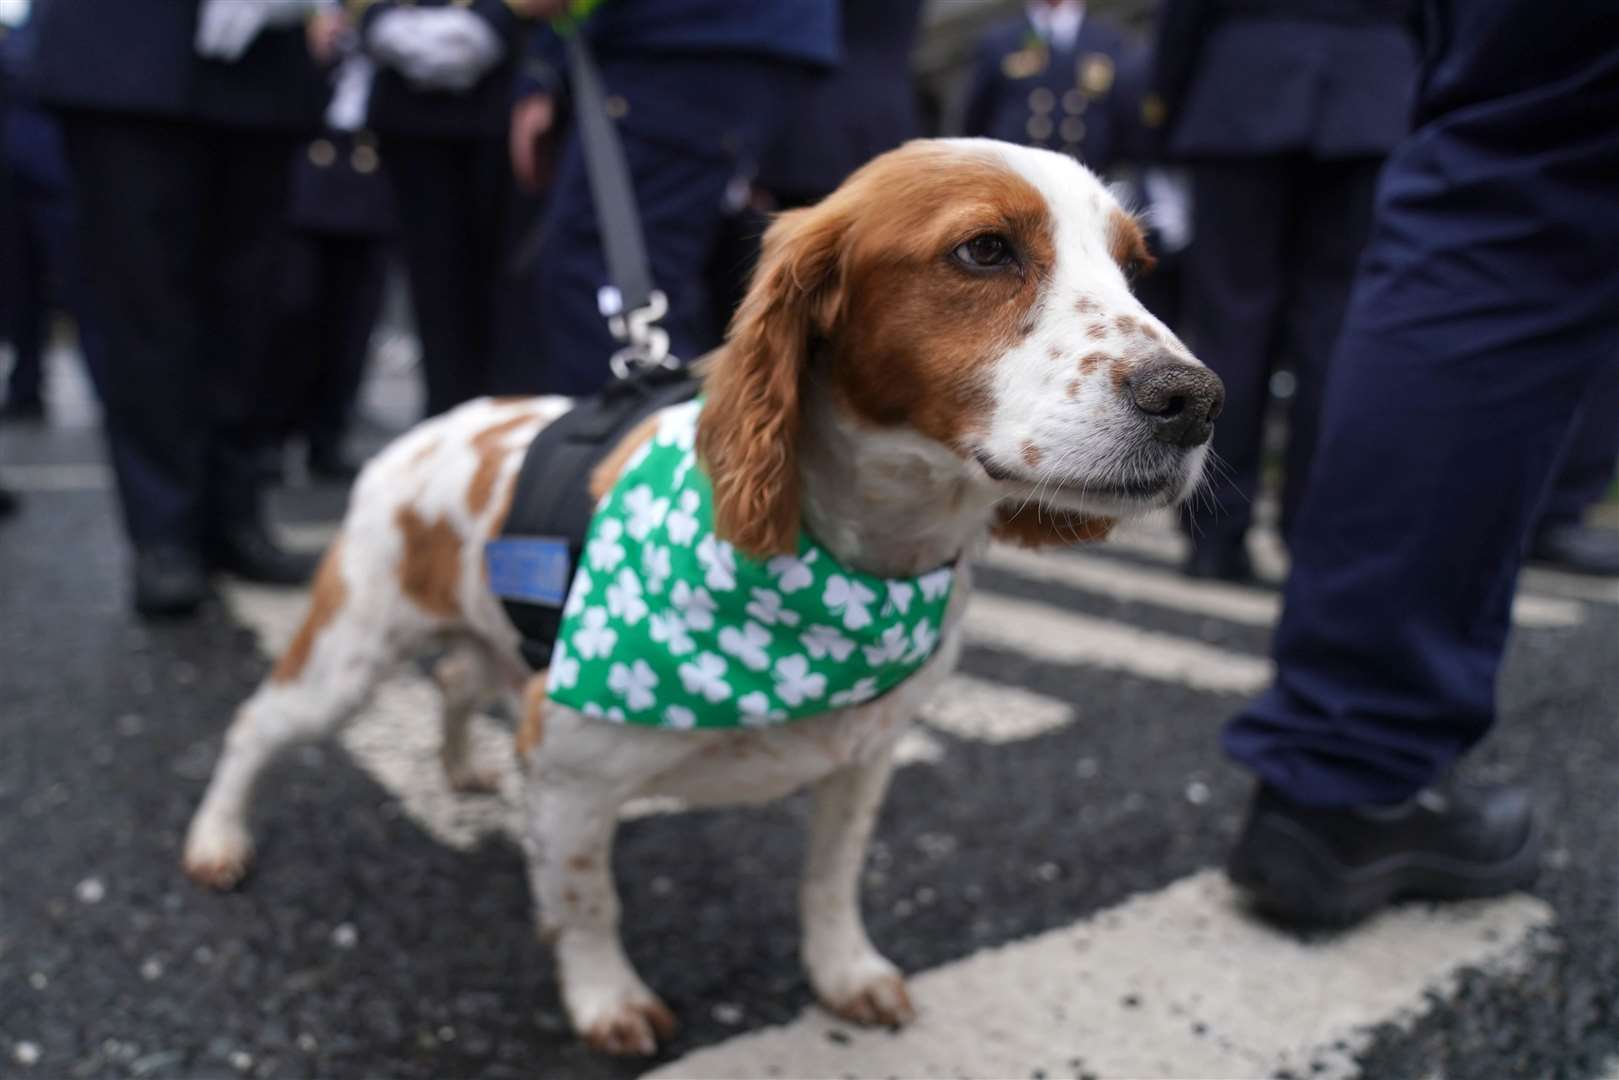 Detector dog Gus from Dublin airport takes part in the event (Brian Lawless/PA)